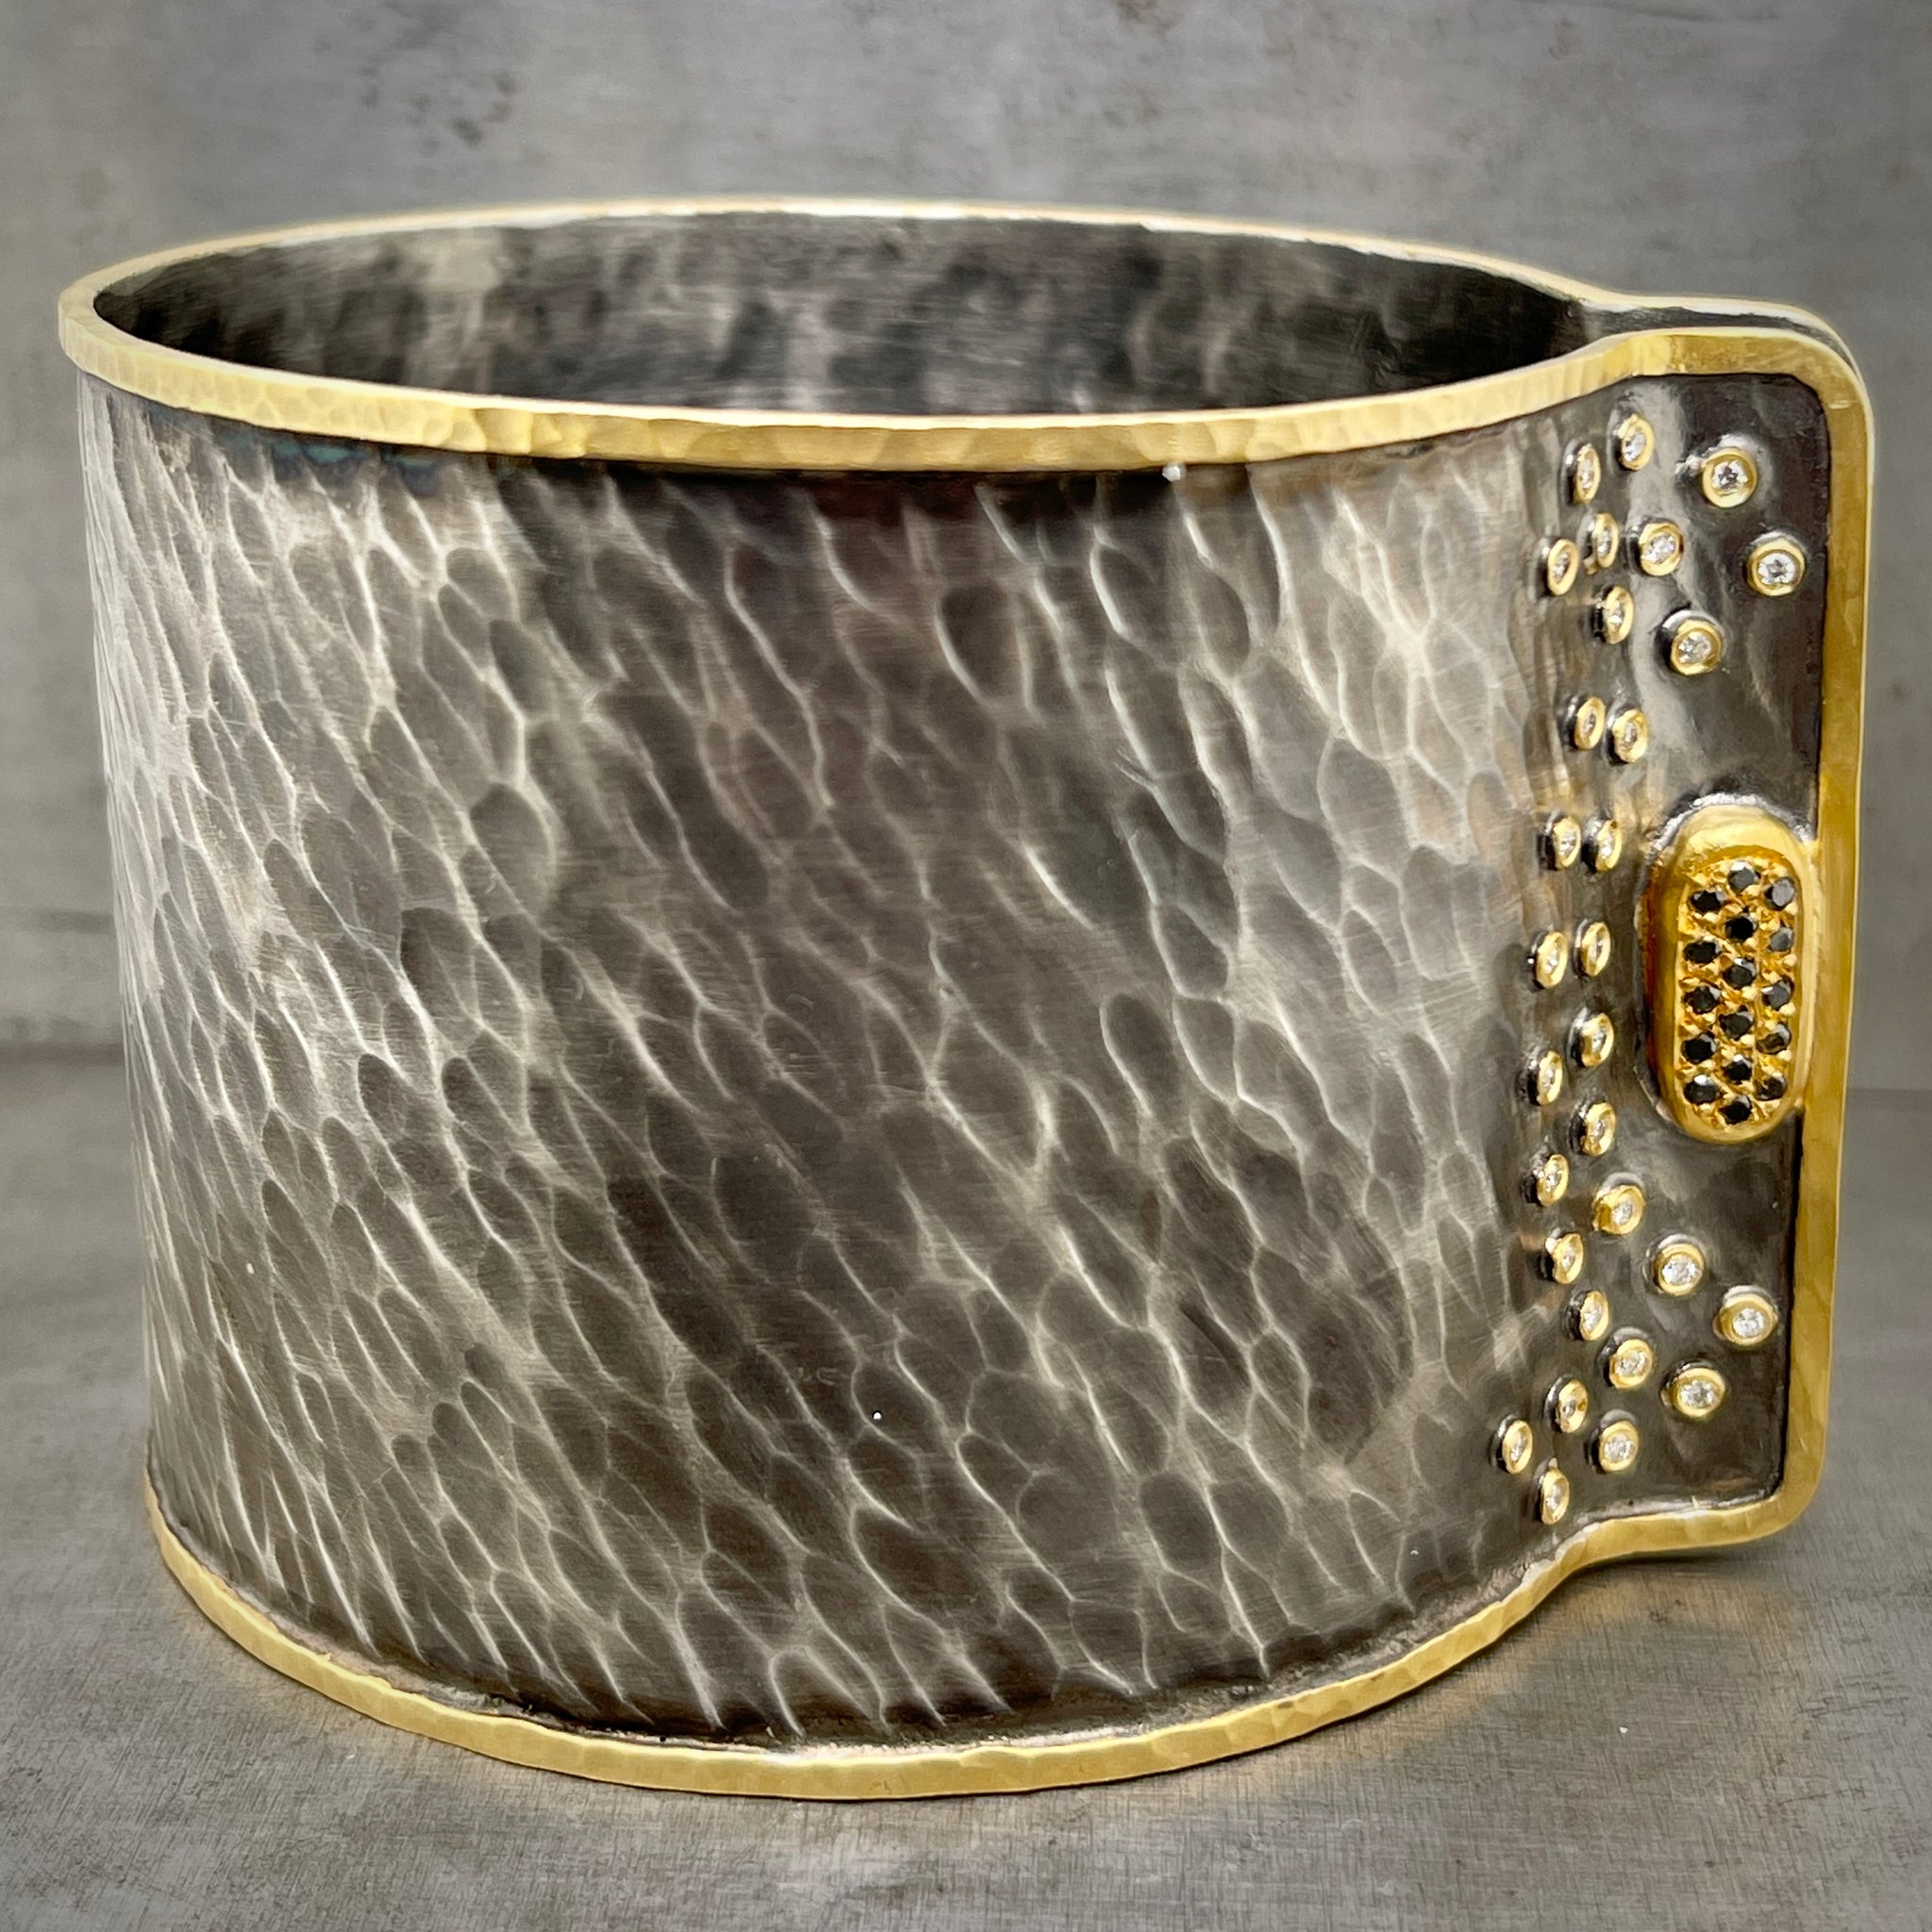 Full frontal view of ancient oxidized cuff.